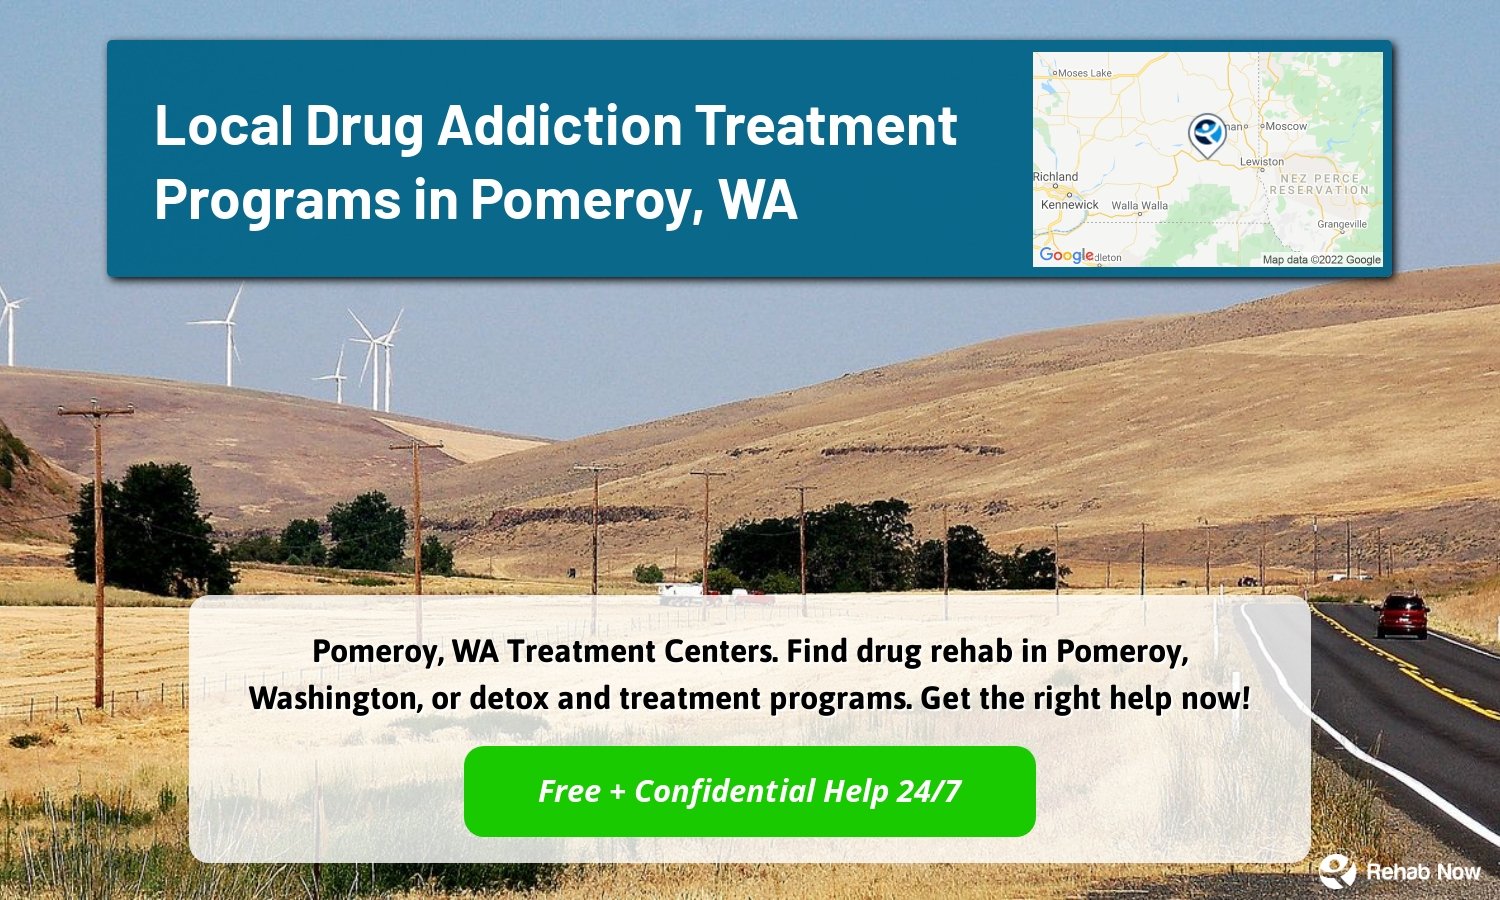 Pomeroy, WA Treatment Centers. Find drug rehab in Pomeroy, Washington, or detox and treatment programs. Get the right help now!